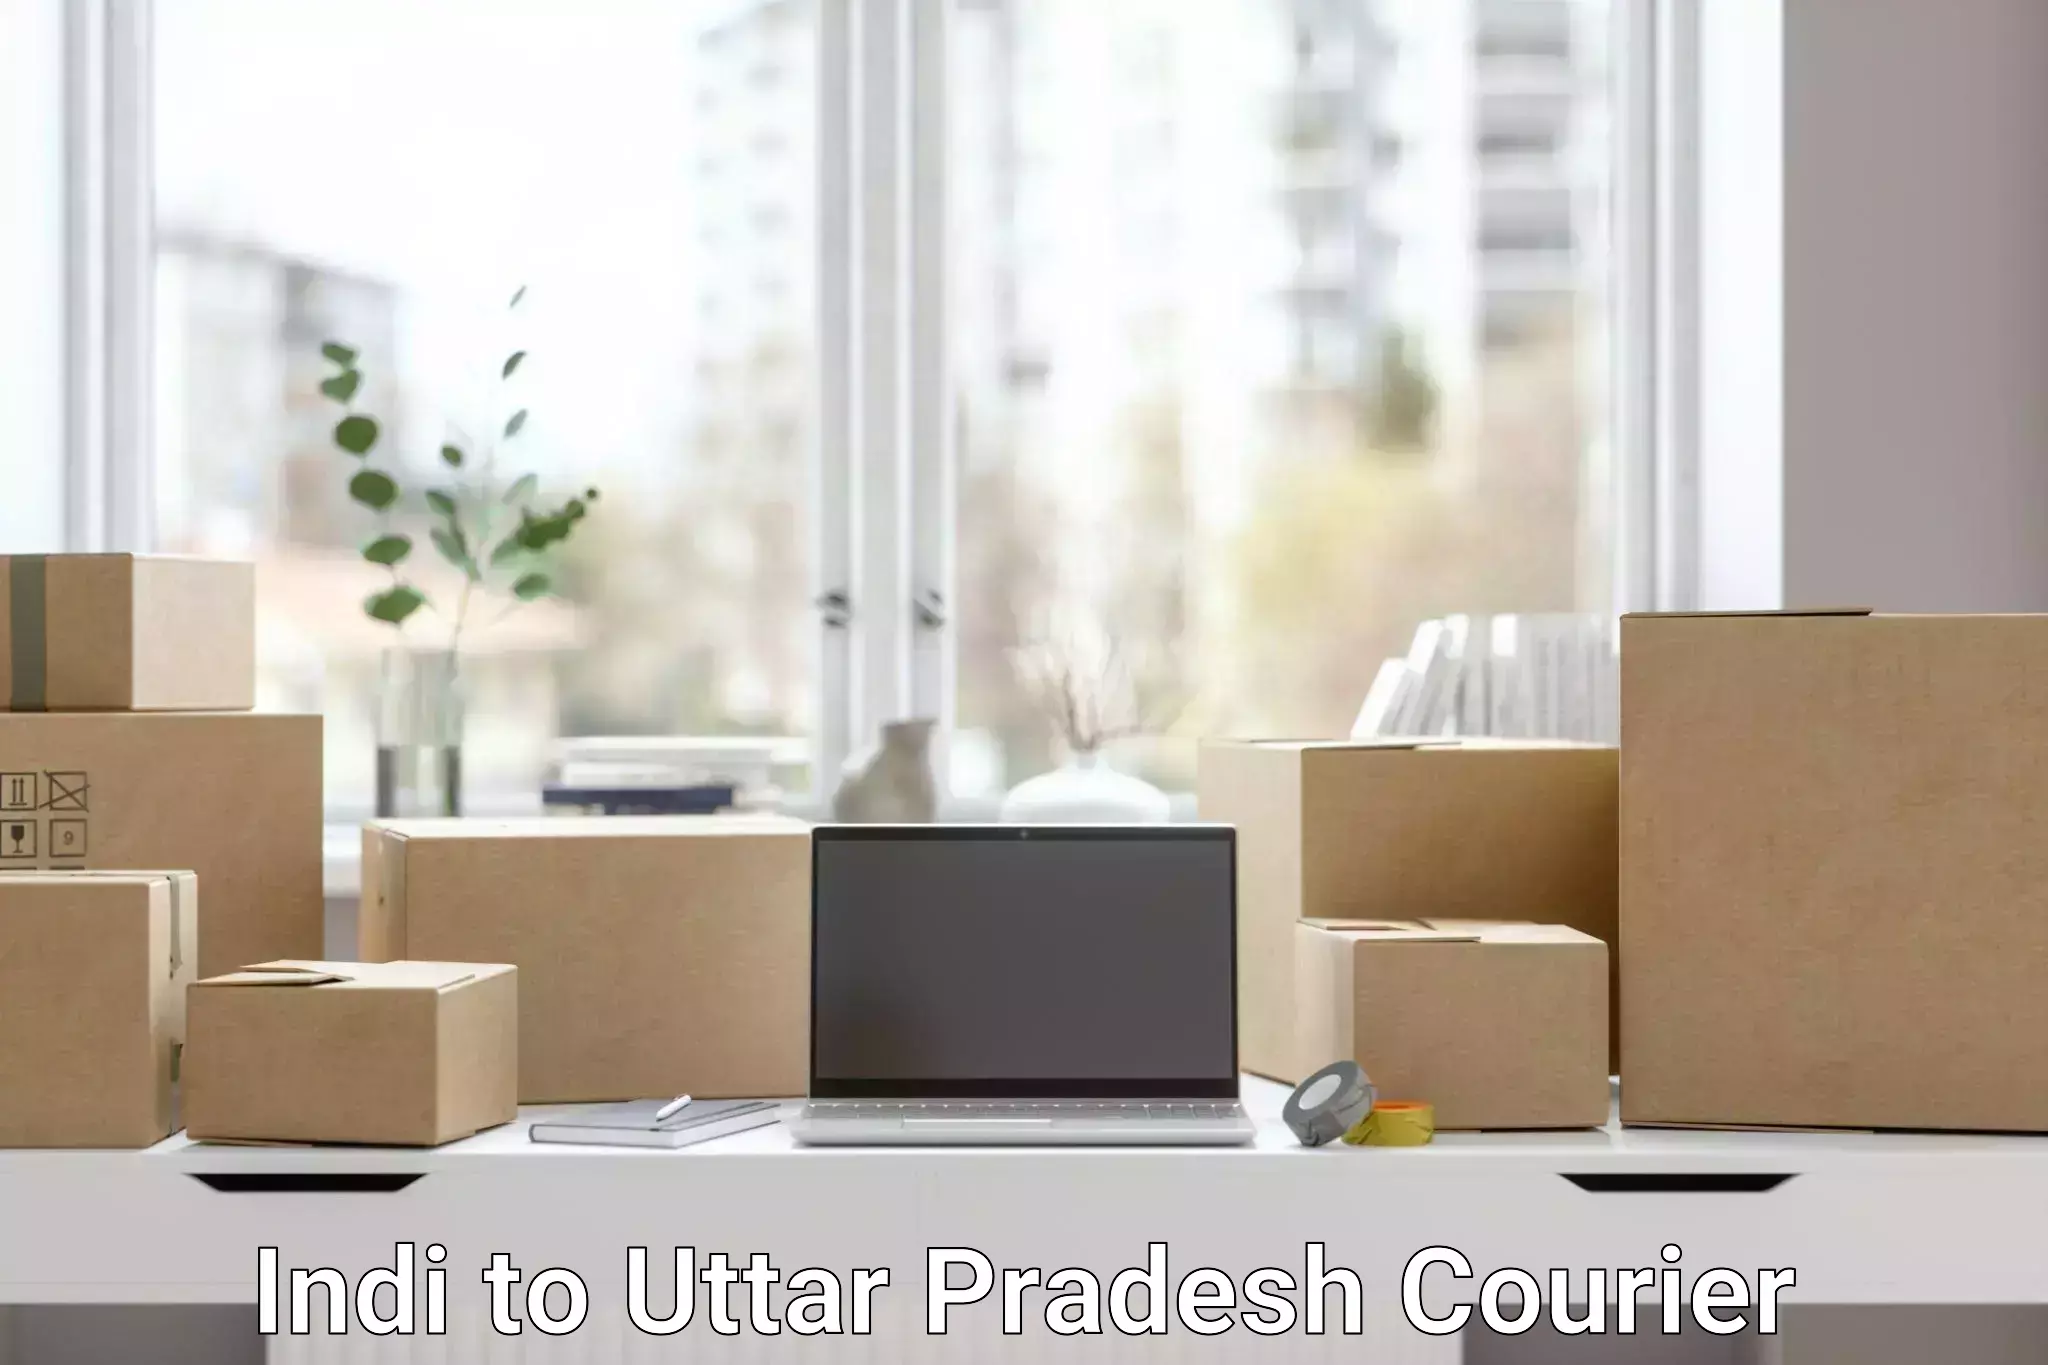 Same-day delivery solutions Indi to Uttar Pradesh